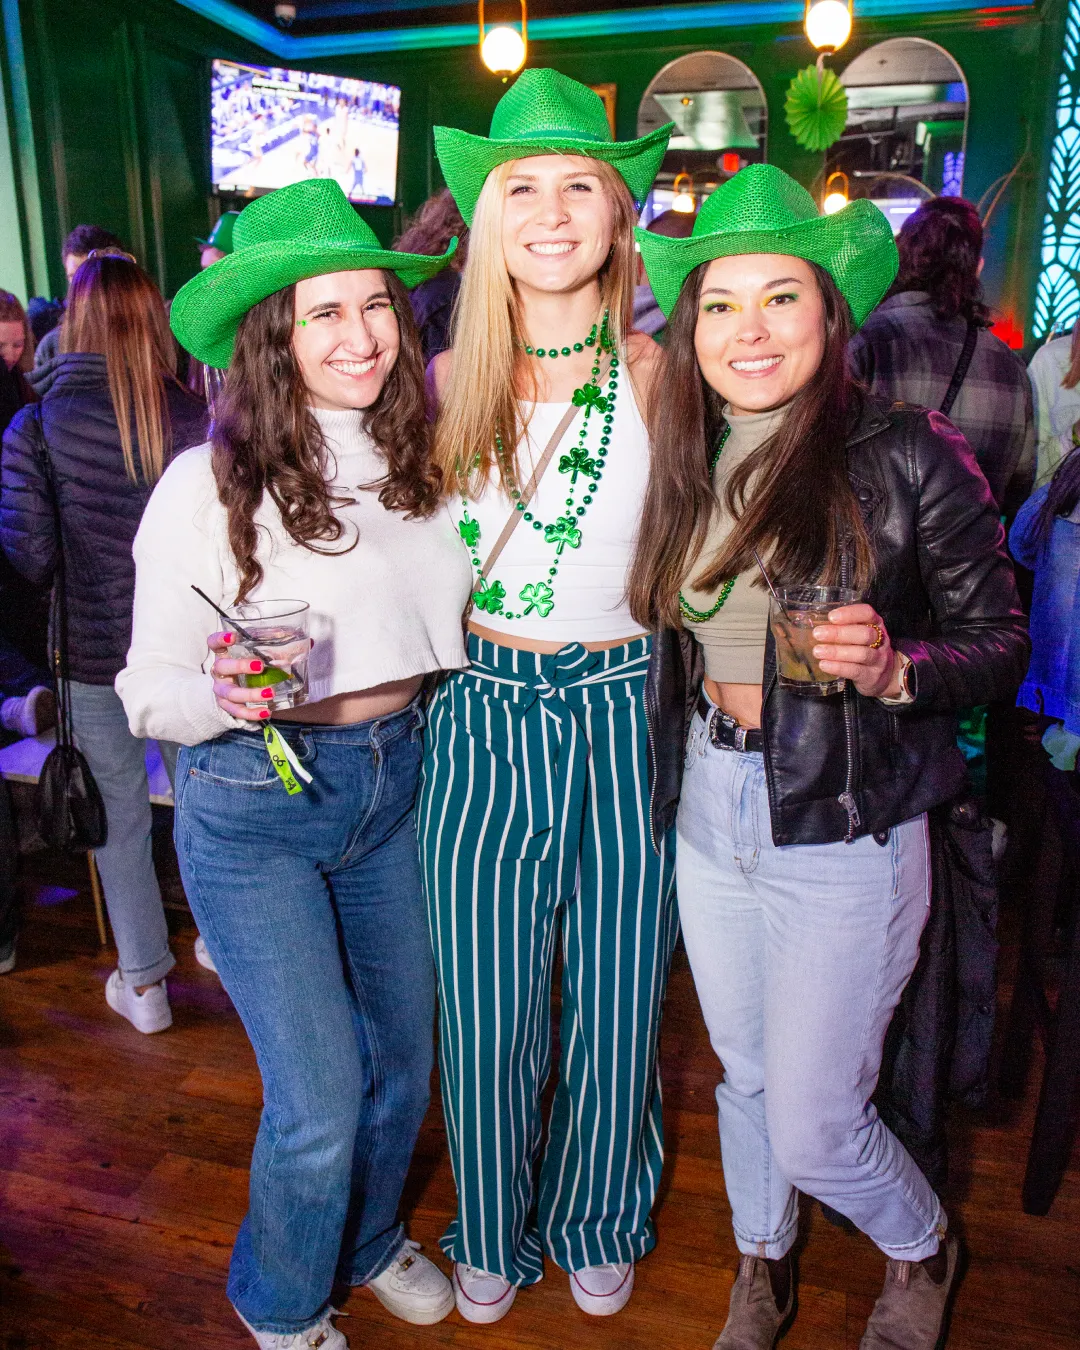 Beaming faces beneath green cowboy hats, a group of 3 girls smile in the vibrant ambiance of the bar crawl's st pats celebration
